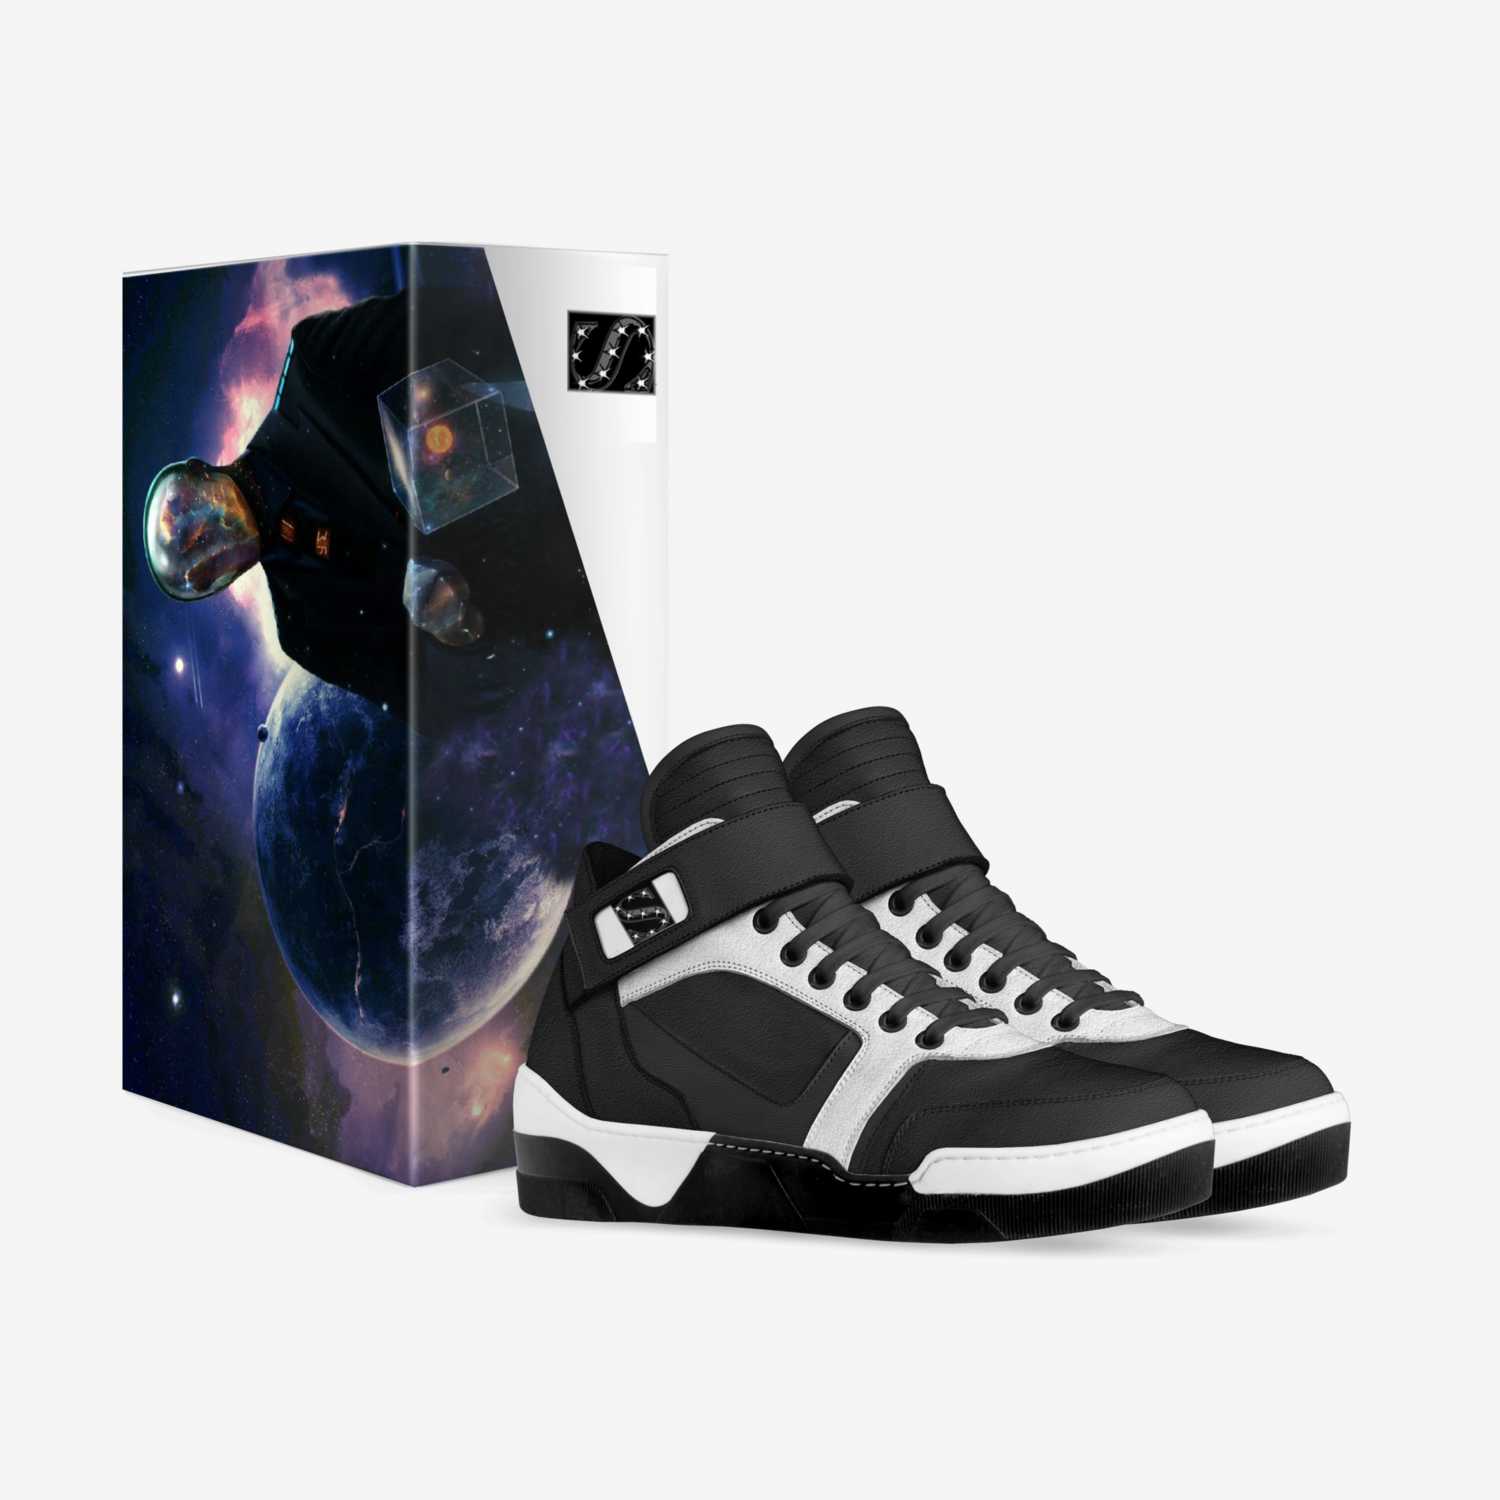 STARRRUNNERS custom made in Italy shoes by Starr Runner | Box view